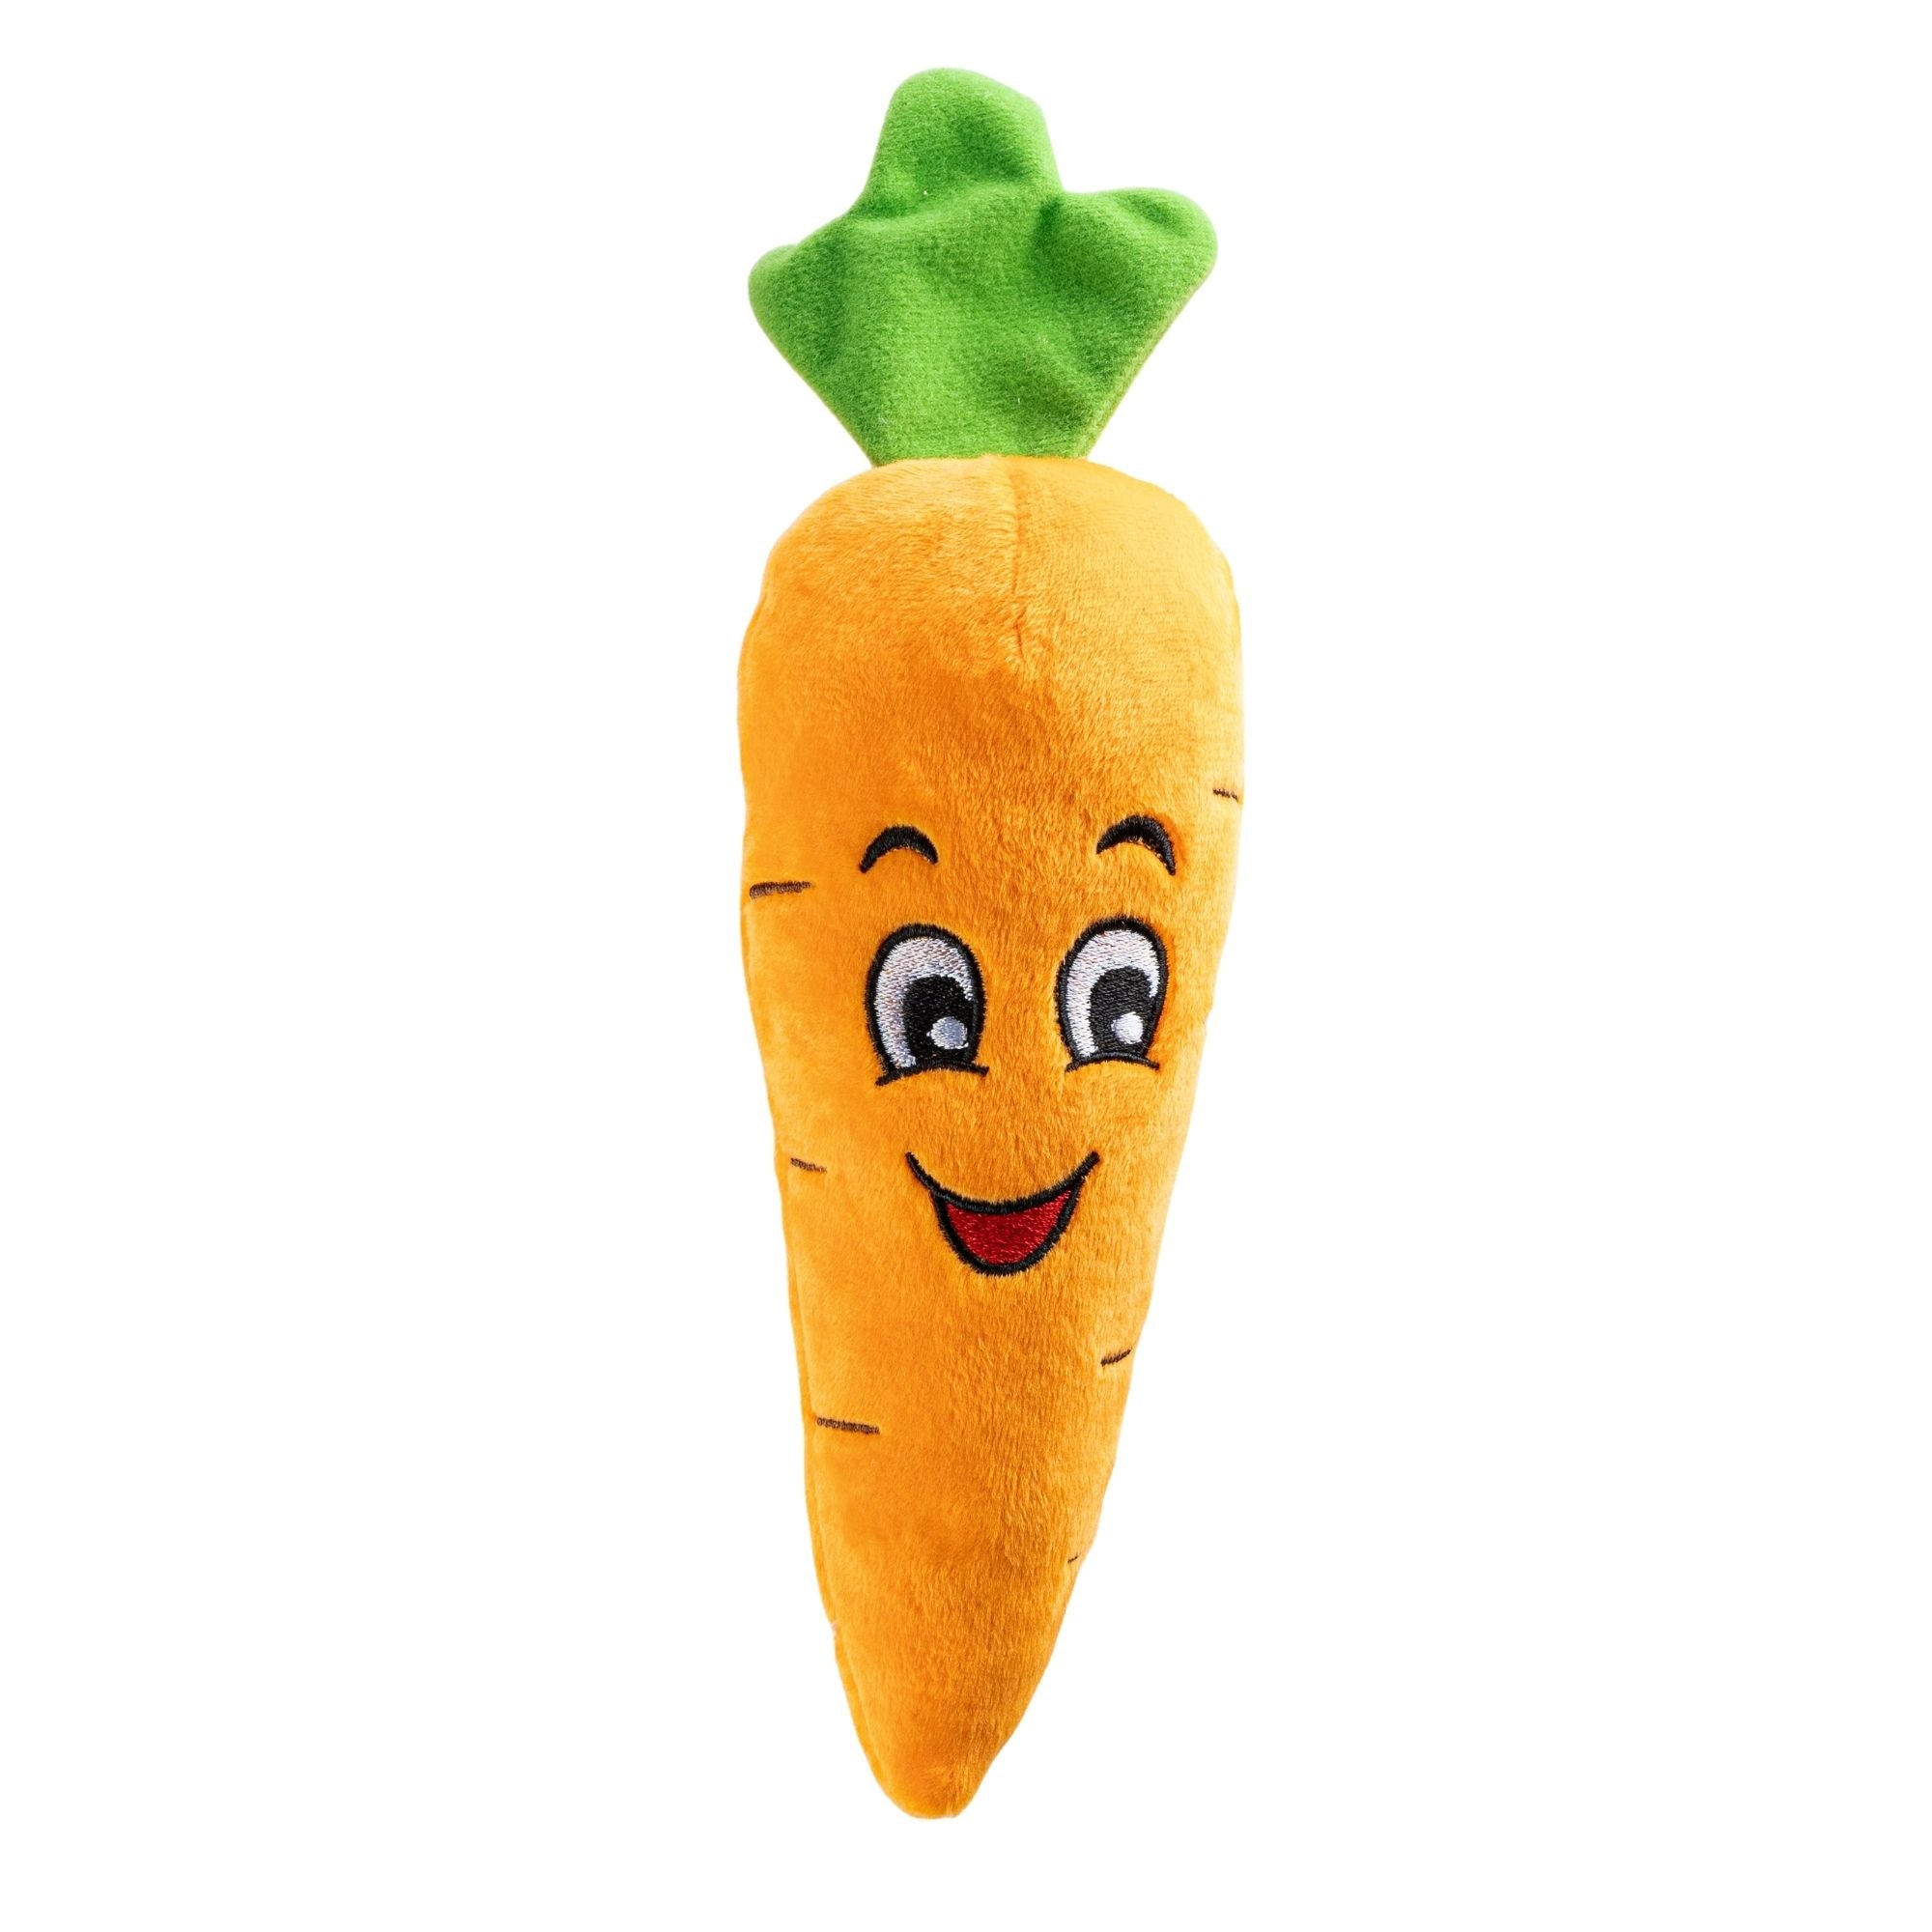  1Pc Soft Dog Toys Cute Carrot Plush Chew Squeaker Sound Pet  Puppy Supplies Durable Plush Dog and Cat Toys with Multi-Squeaks : Pet  Supplies